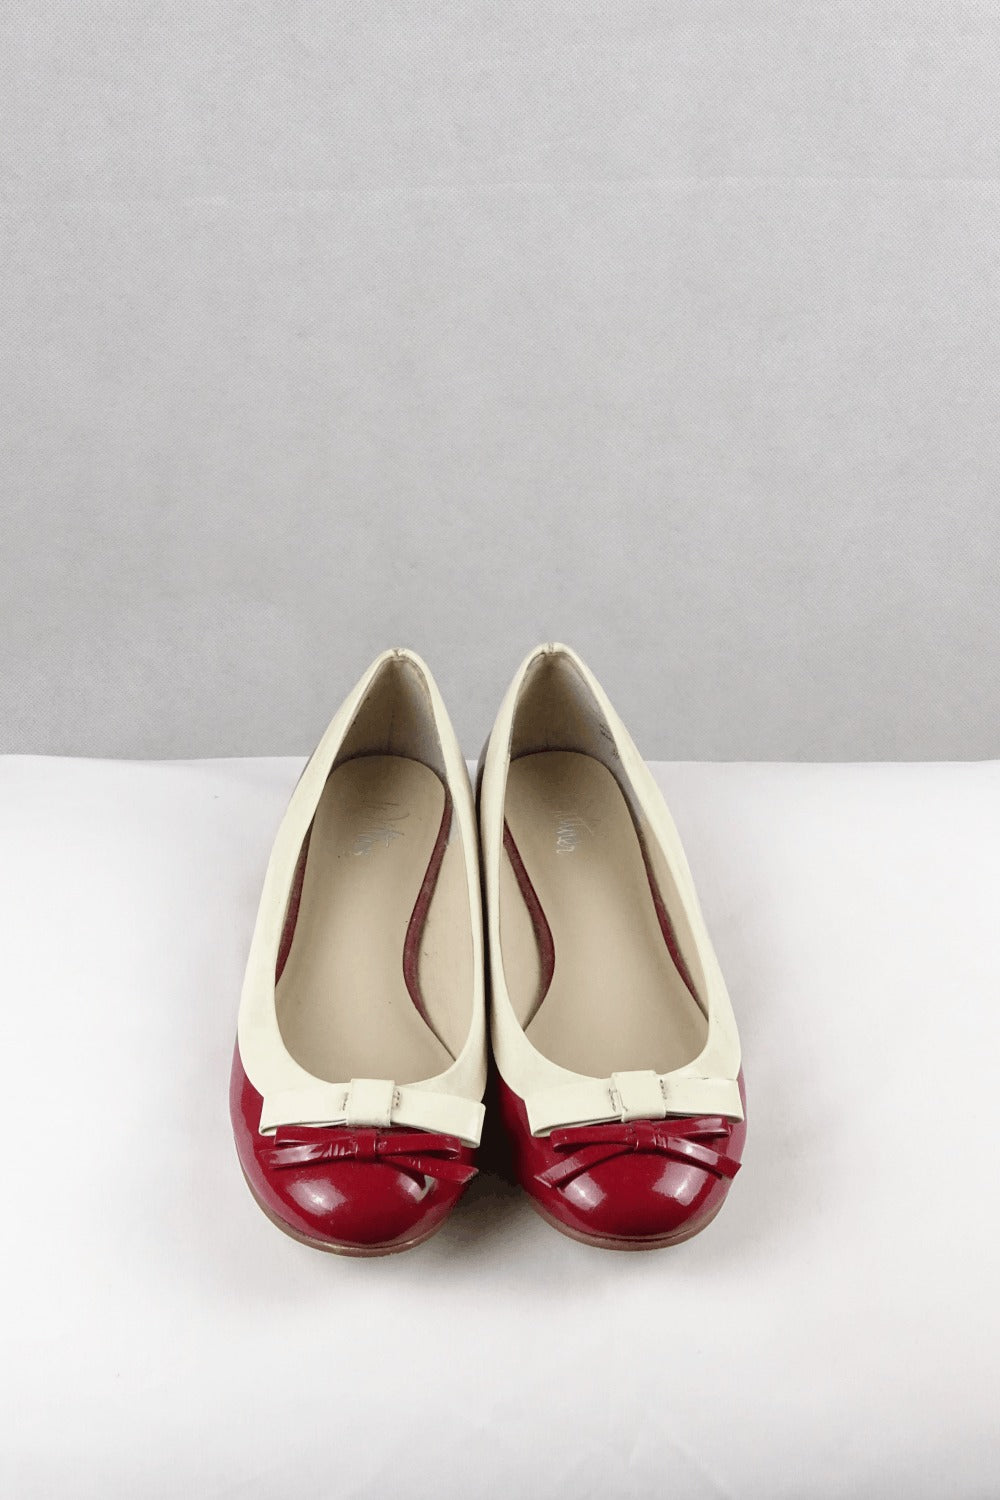 Wittner Red And Ivory Ballet Flat 6